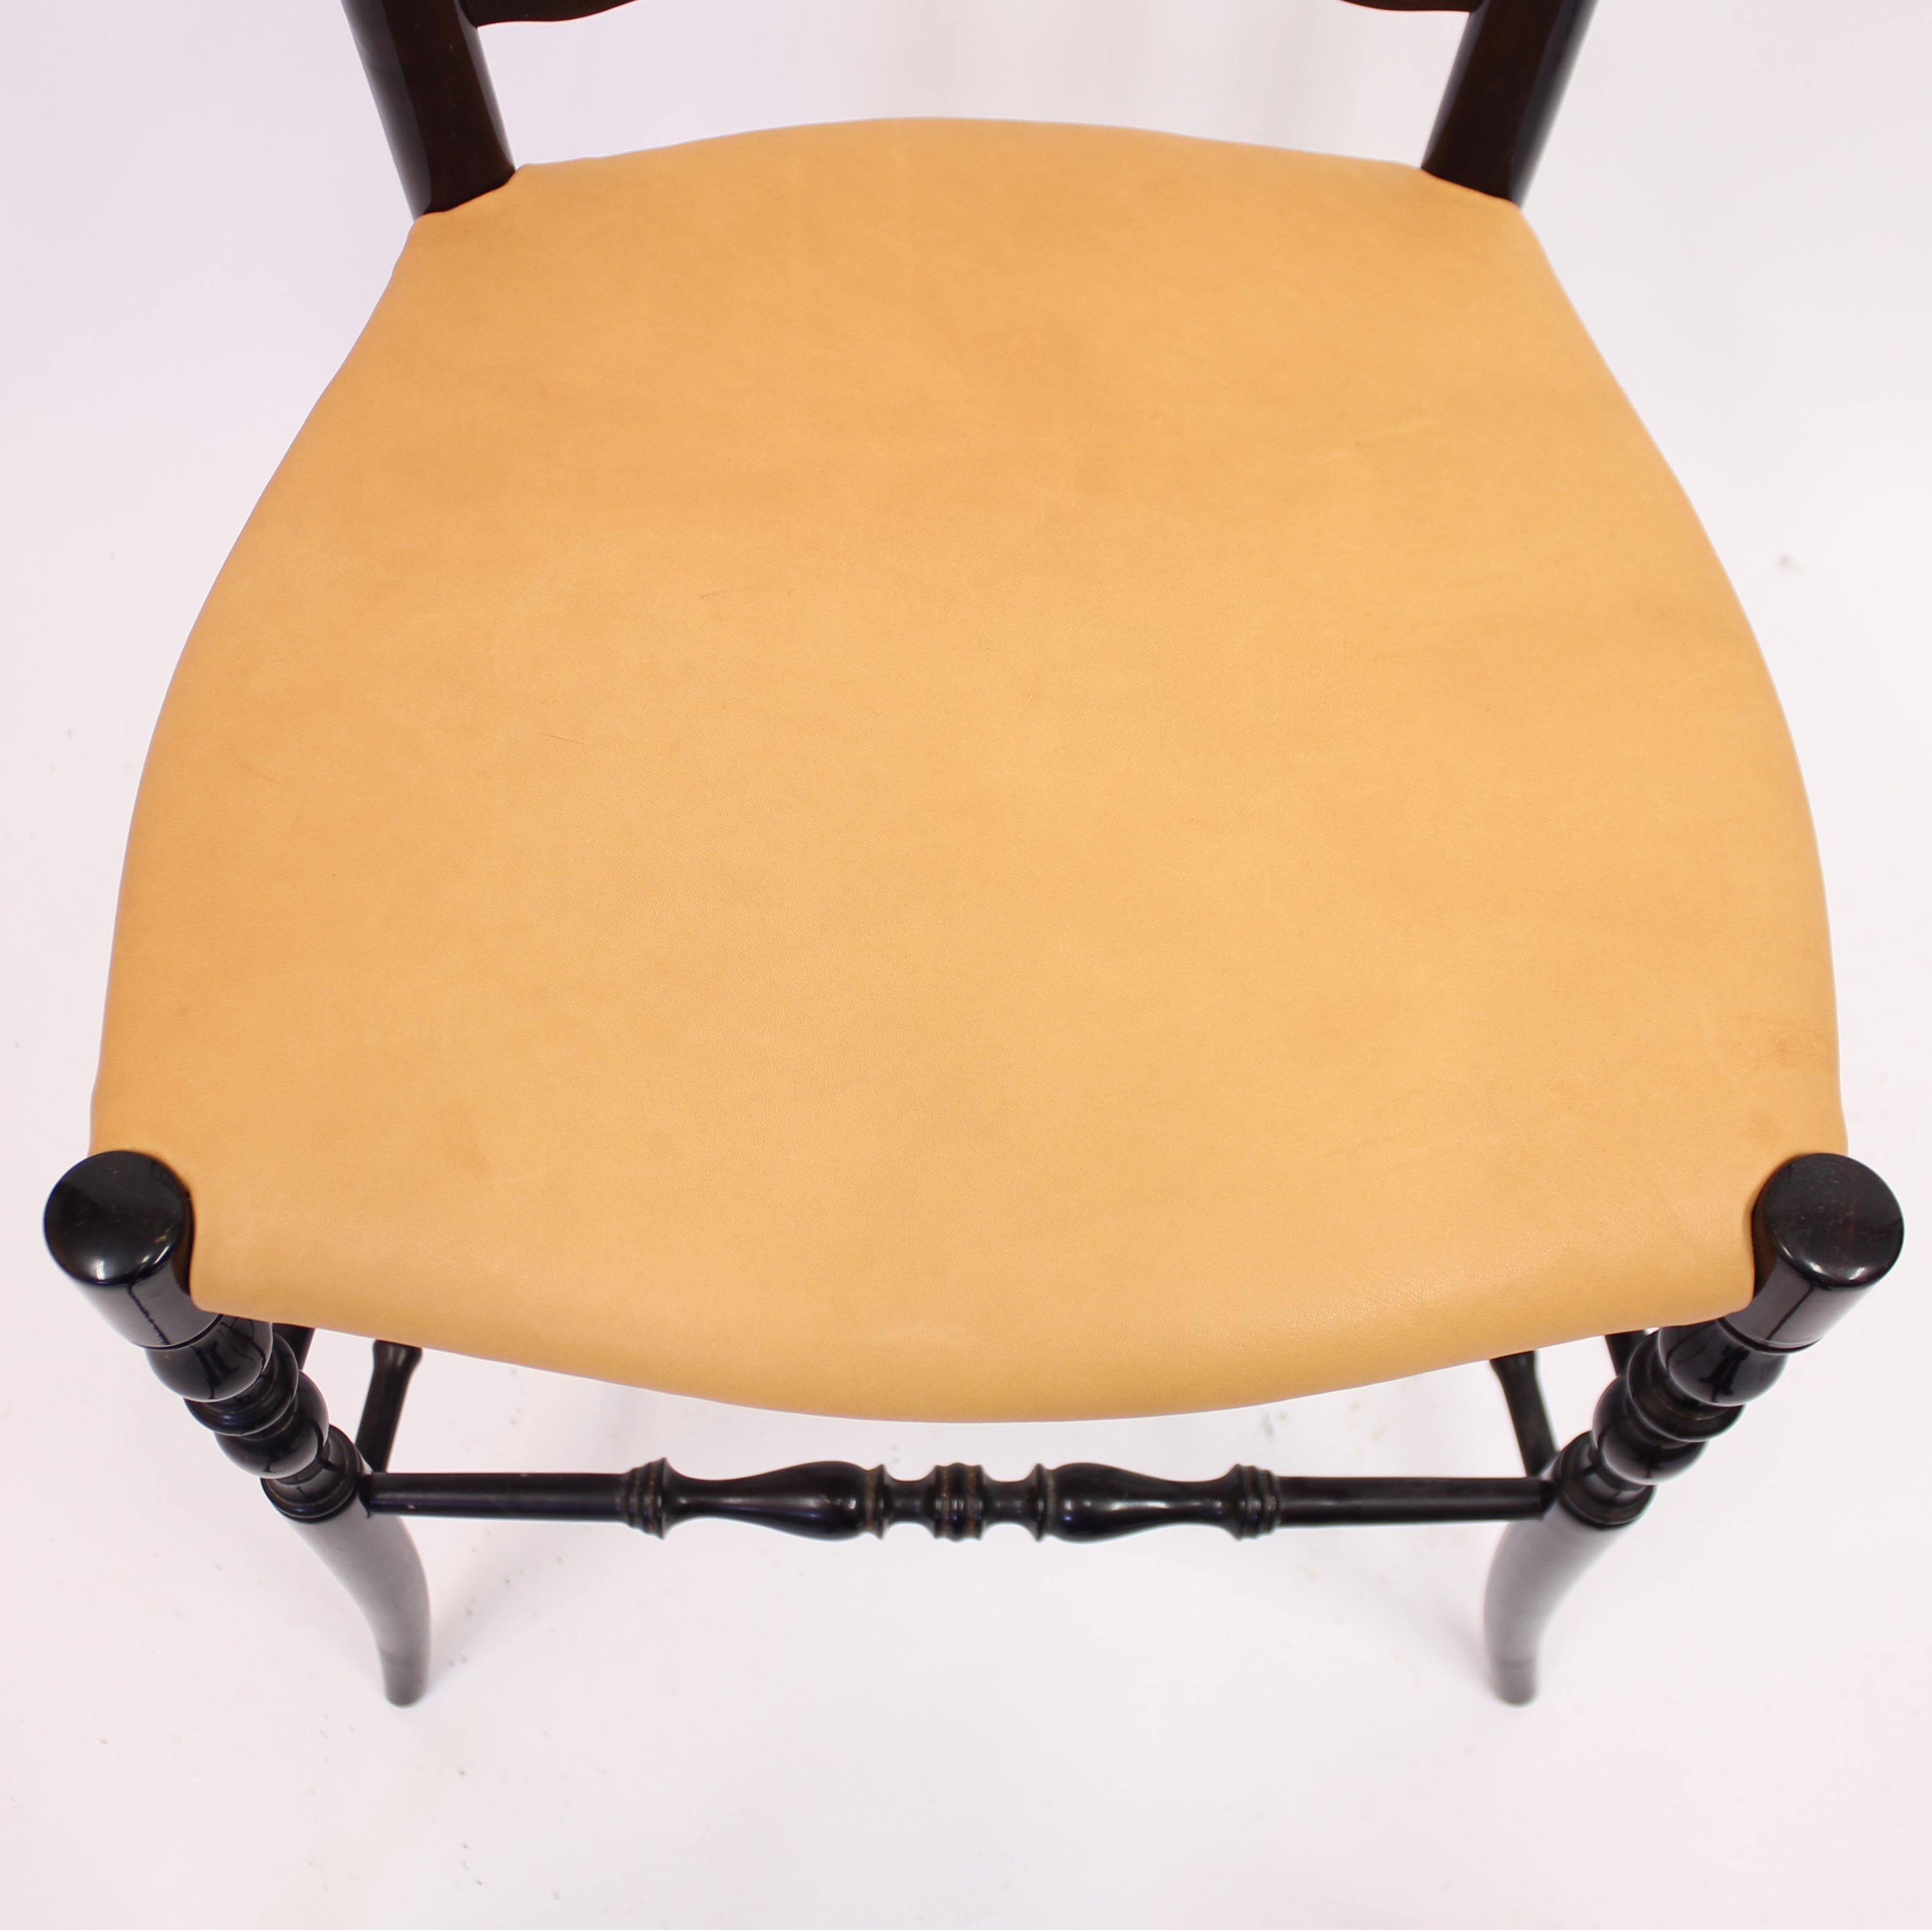 Pair of Vintage Chiavari Chairs with Leather Seats, circa 1950 10